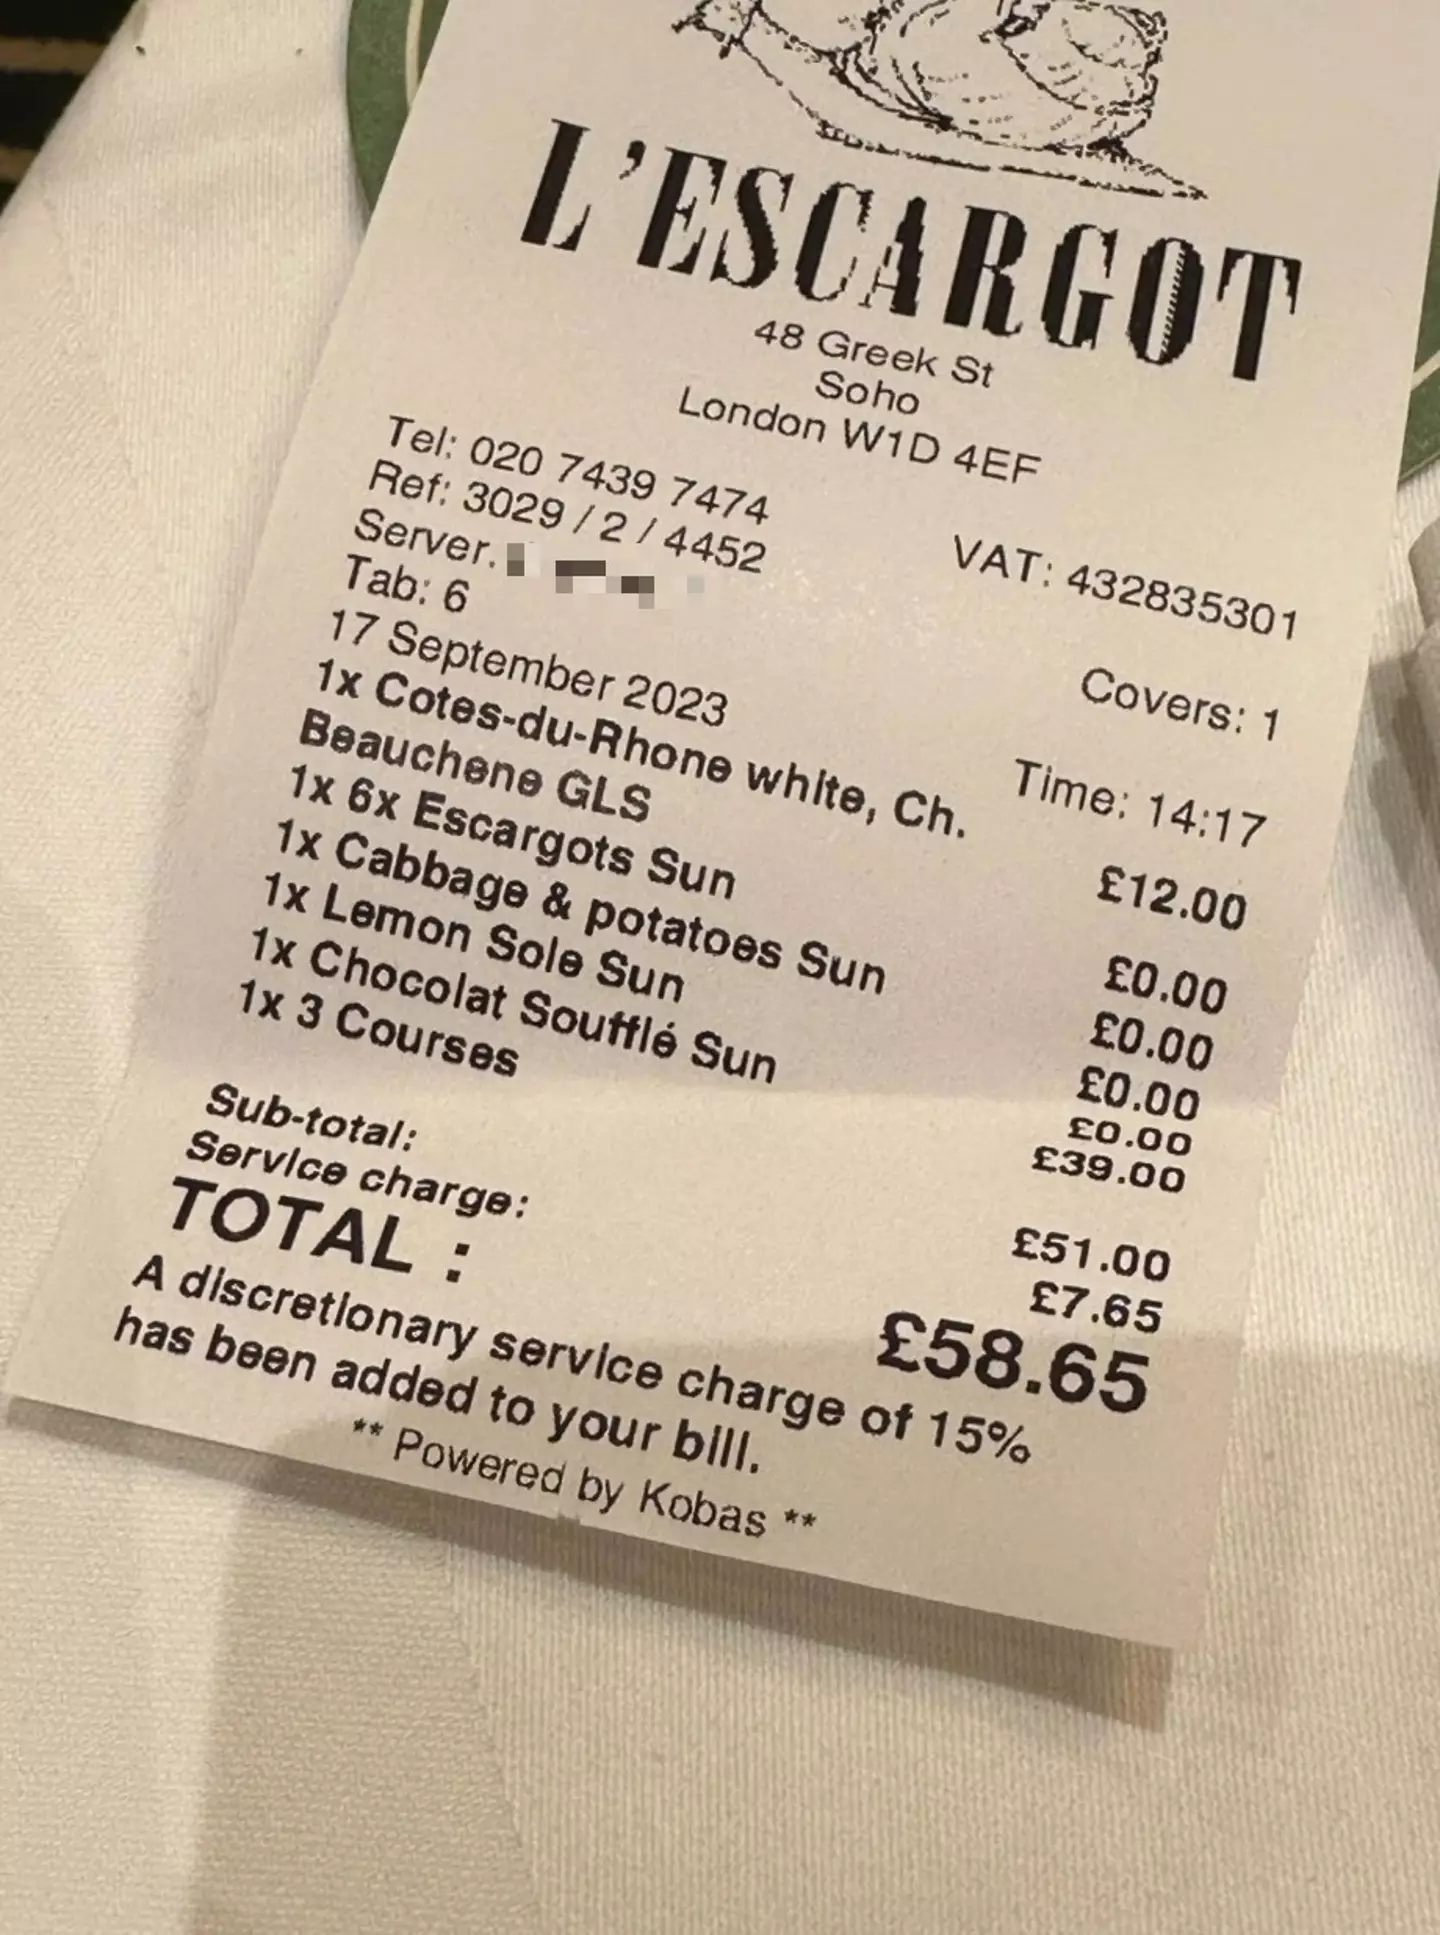 The bill included a discretionary service charge.